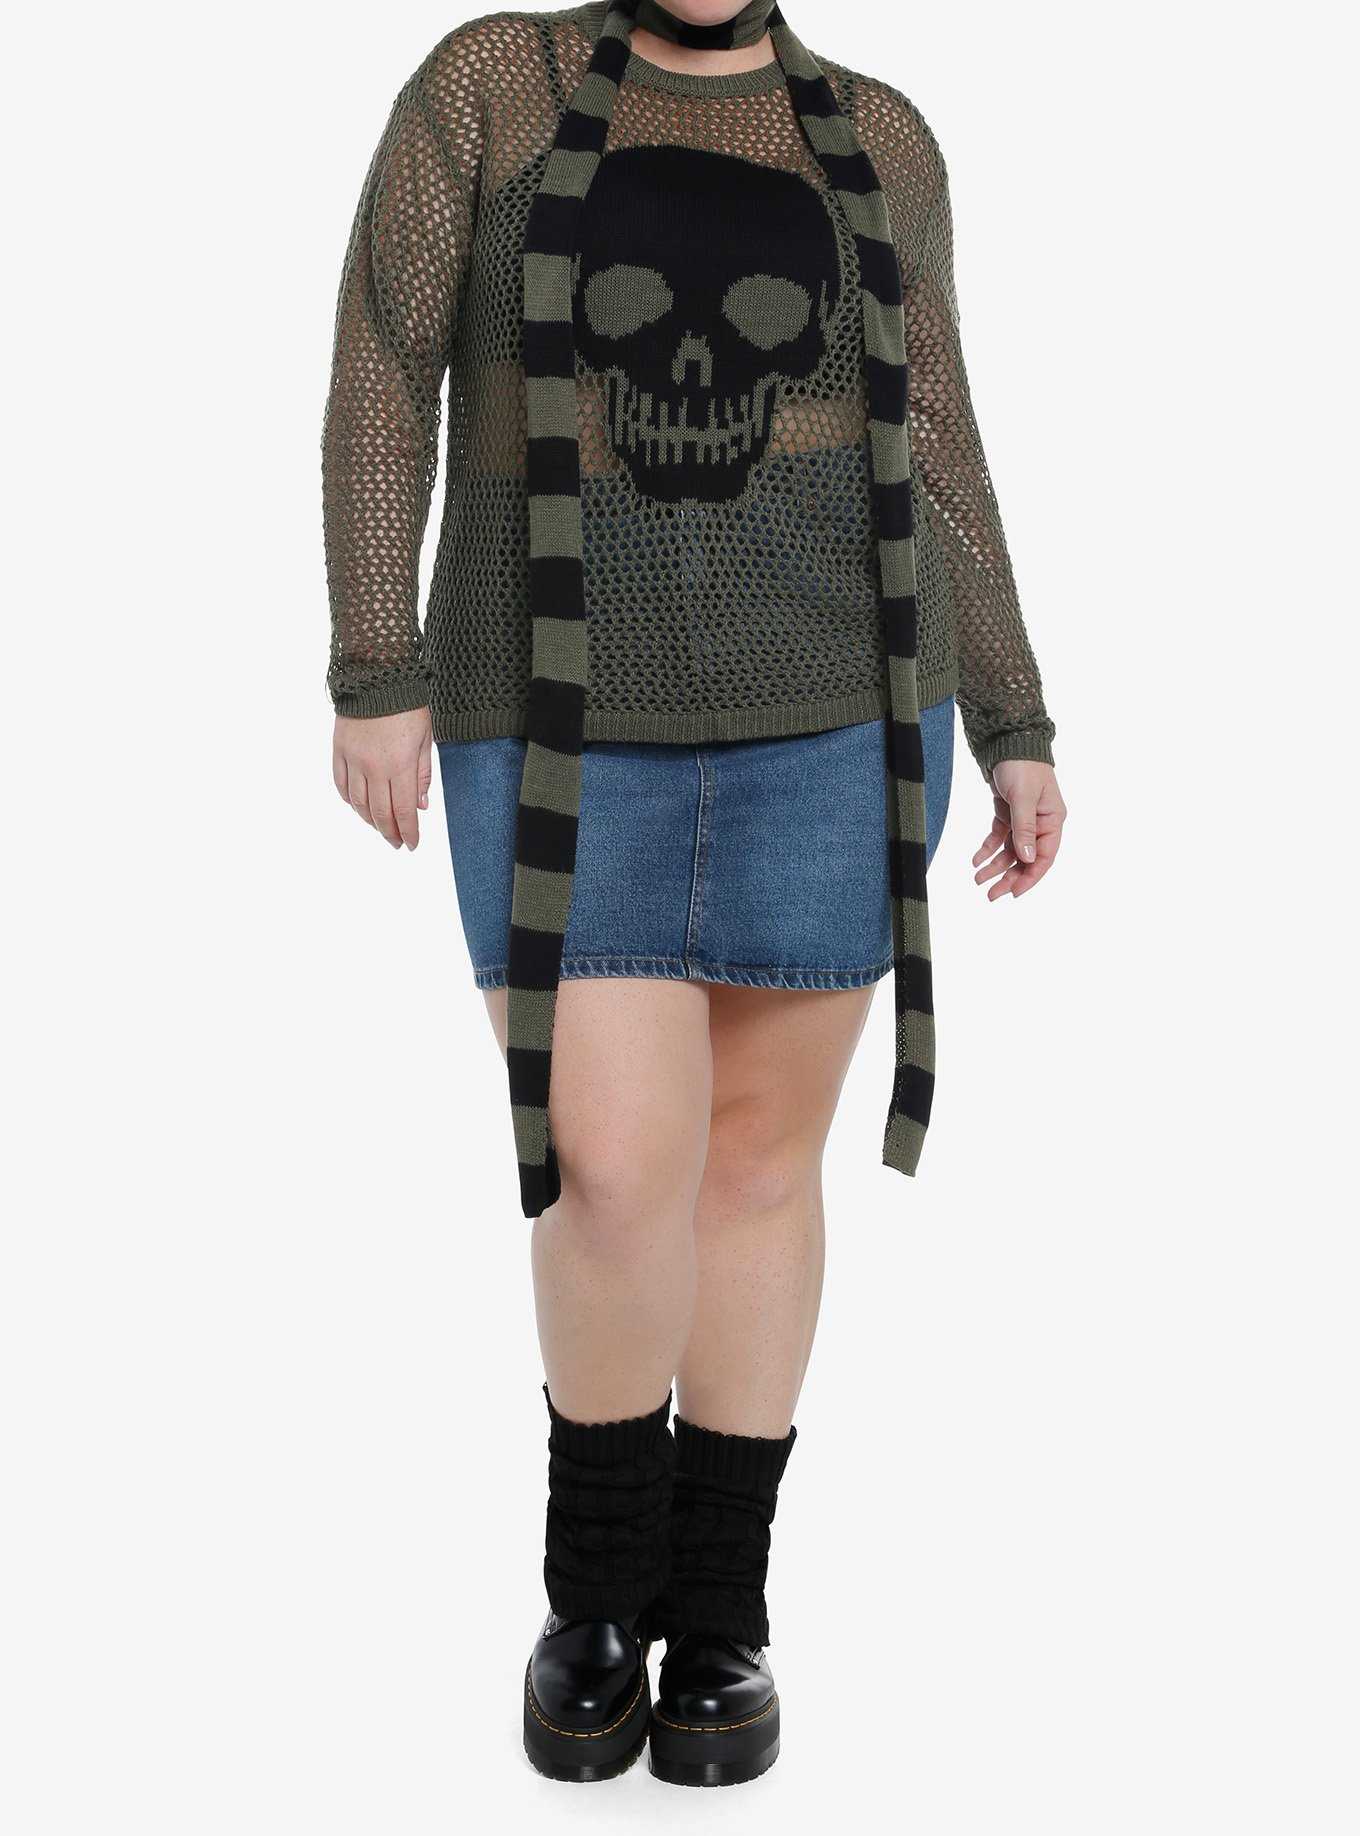 Social Collision Skull Girls Knit Sweater With Scarf Plus Size, , hi-res